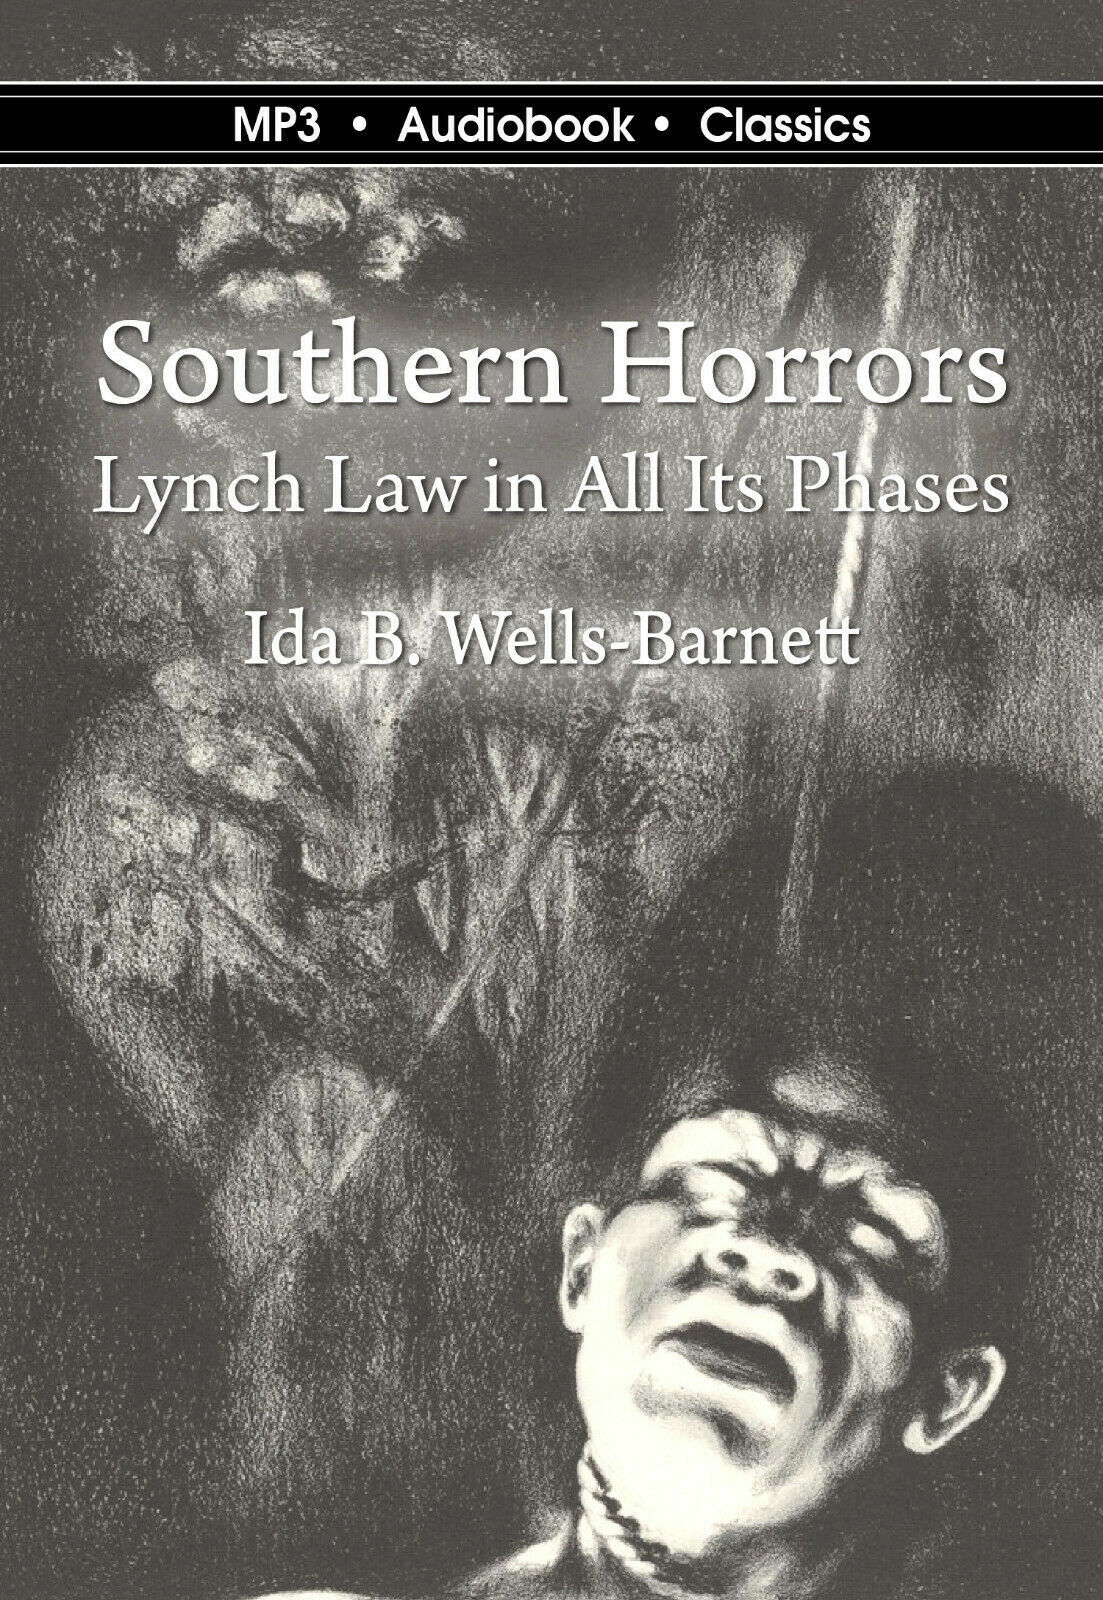 Southern Horrors: Lynch Law in All Its Phases - MP3 CD Audiobook in DVD case